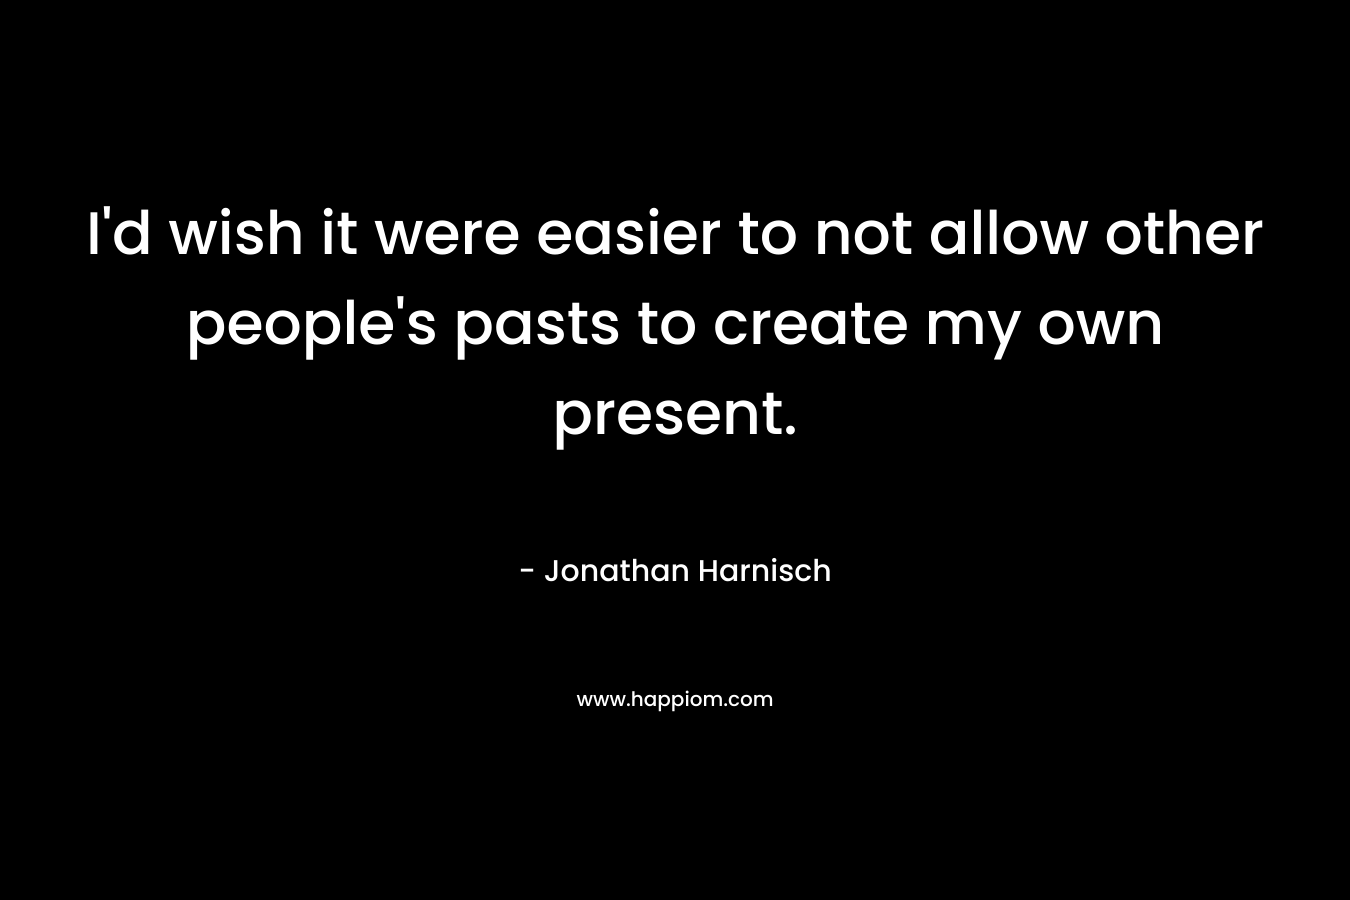 I’d wish it were easier to not allow other people’s pasts to create my own present. – Jonathan Harnisch